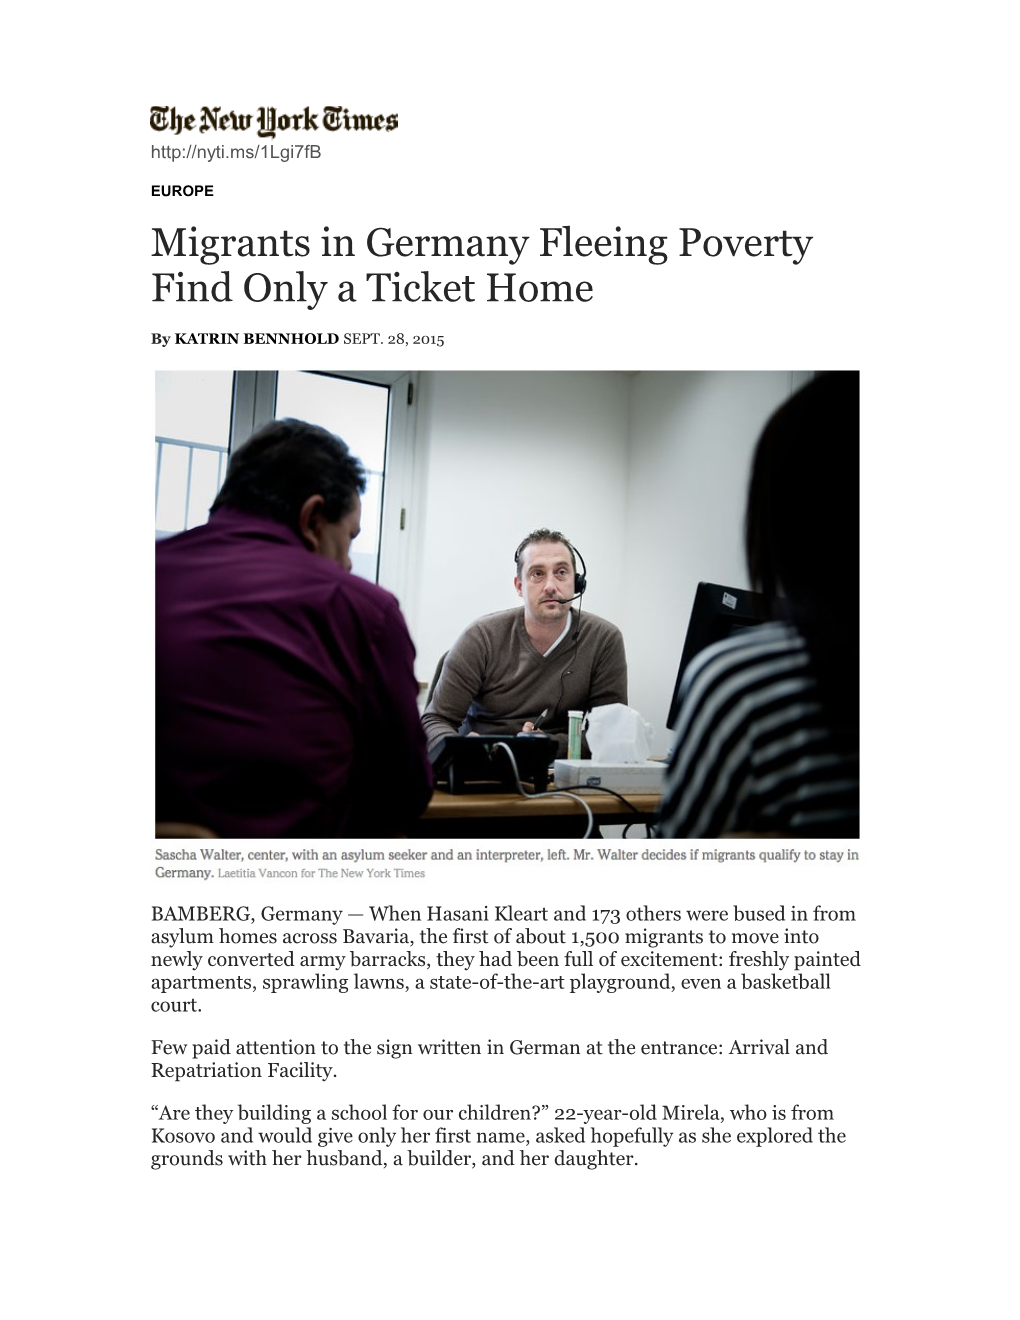 Migrants in Germany Fleeing Poverty Find Only a Ticket Home